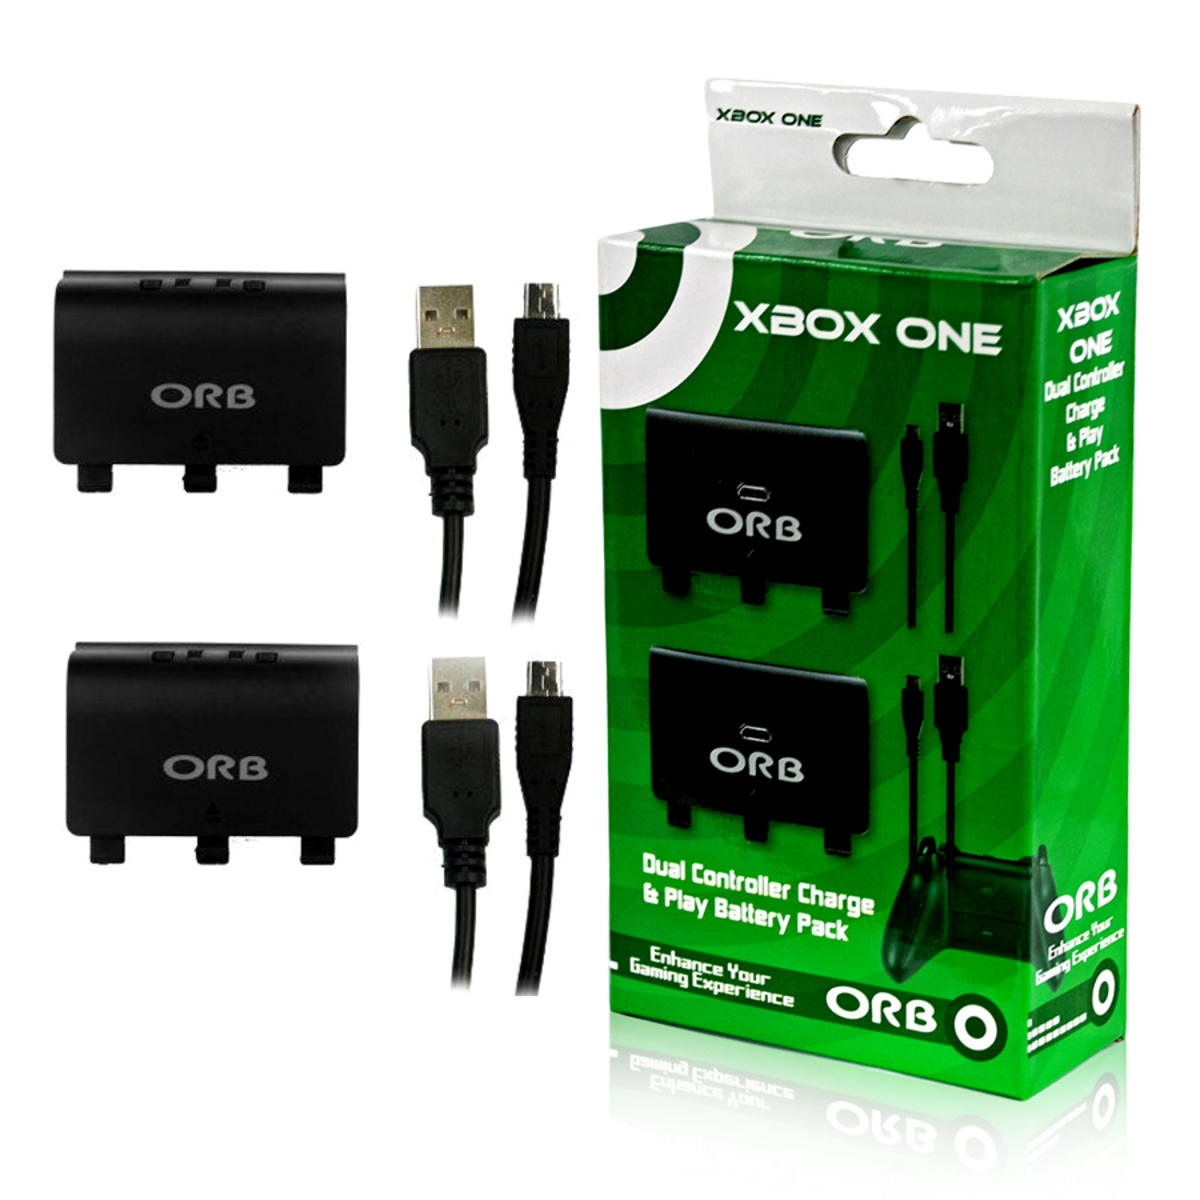 ORB Xbox One Dubbel Charge Battery Pack (Xbox One), ORB